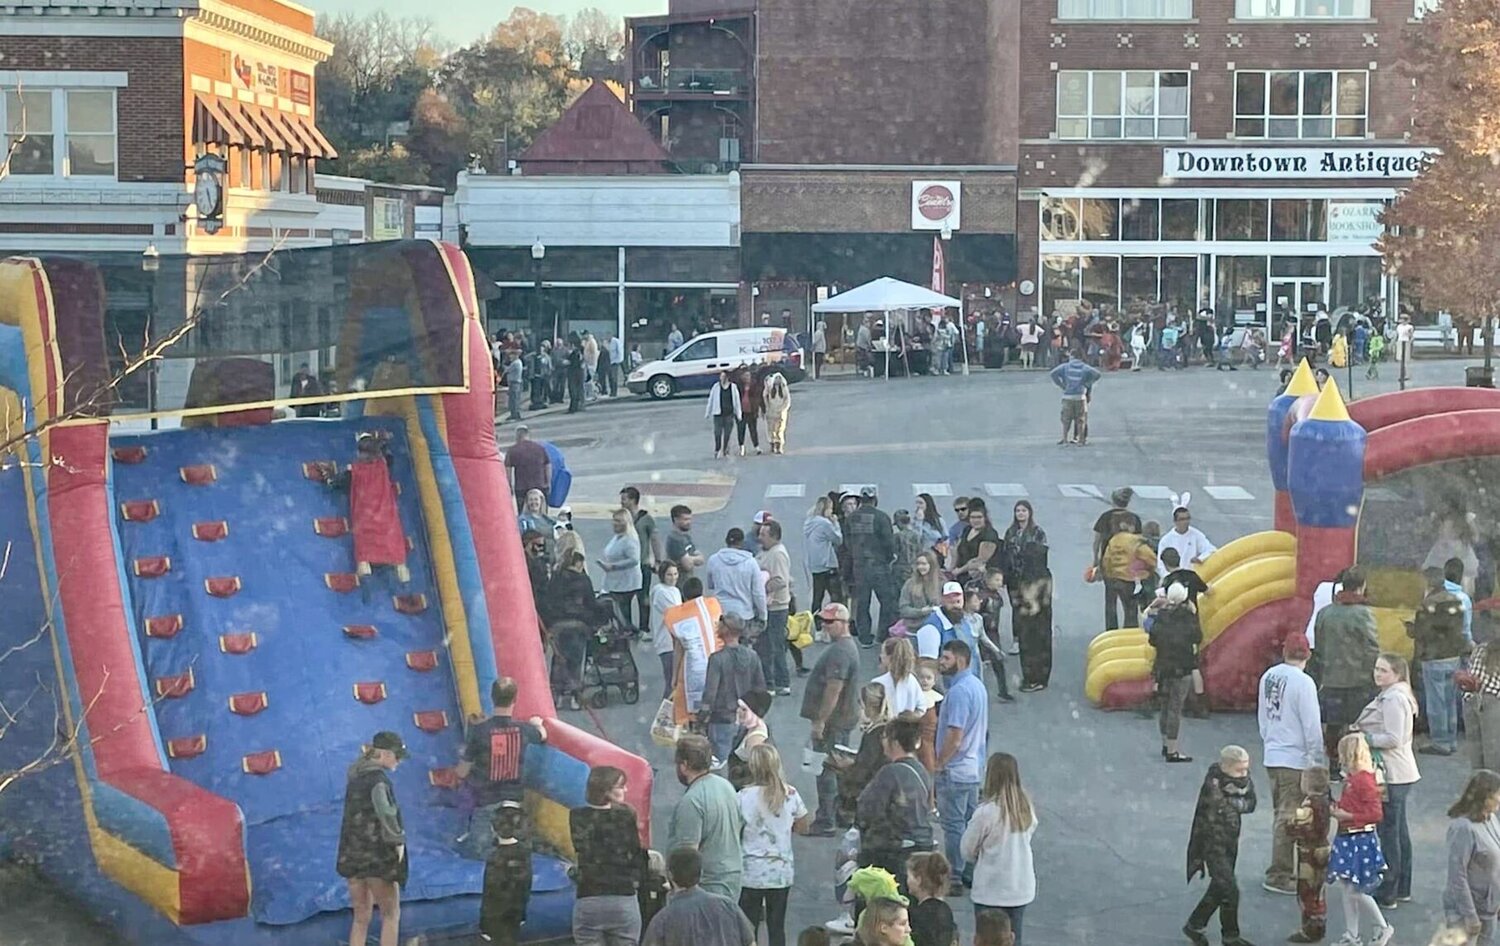 A vibrant snapshot from the 2022 "Scare on the Square" event in downtown West Plains captures the sheer joy and community spirit of the occasion, which drew in a crowd of over 1,000 people. As witches, superheroes, and an array of fantastical characters fill the square, the photo showcases the event's magical ability to bring people together for an unforgettable Halloween celebration. Get ready to experience the fun all over again this year, as the West Plains Downtown Revitalization group promises even more spooktacular festivities on Tuesday from 5 to 7 p.m.